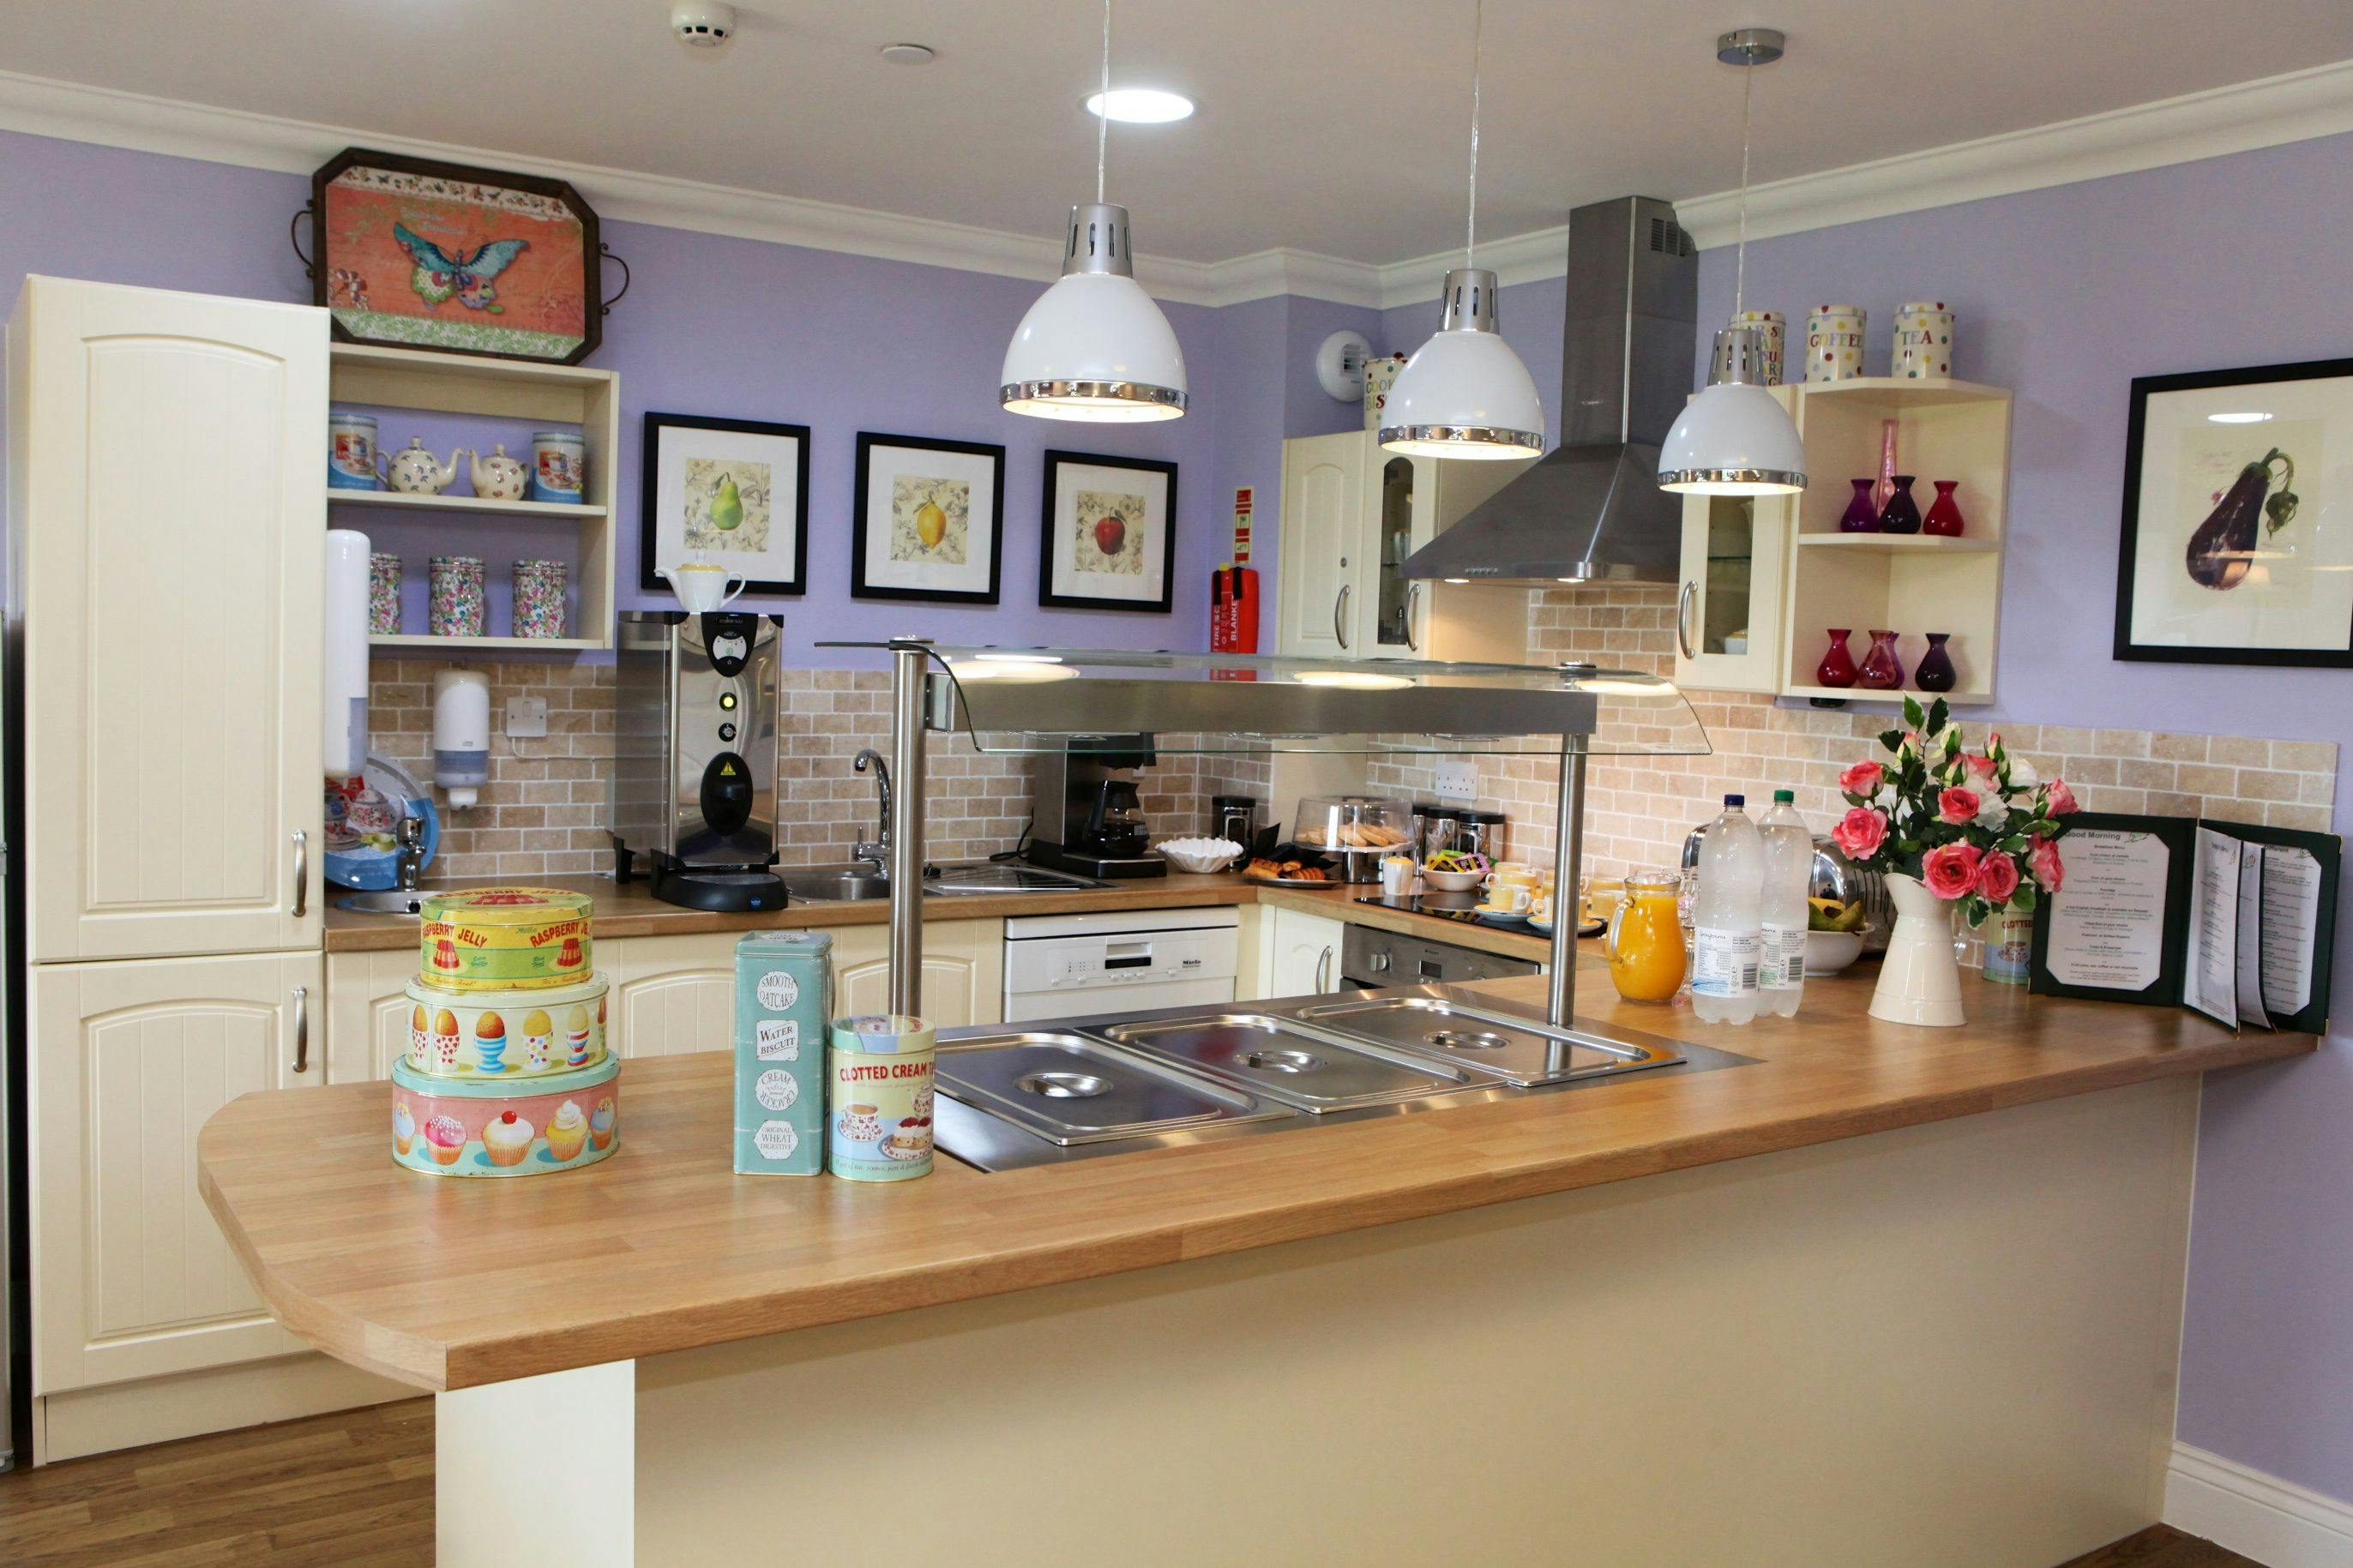 Kitchen of Bryn Ivor Lodge care home in Newport, Cardiff